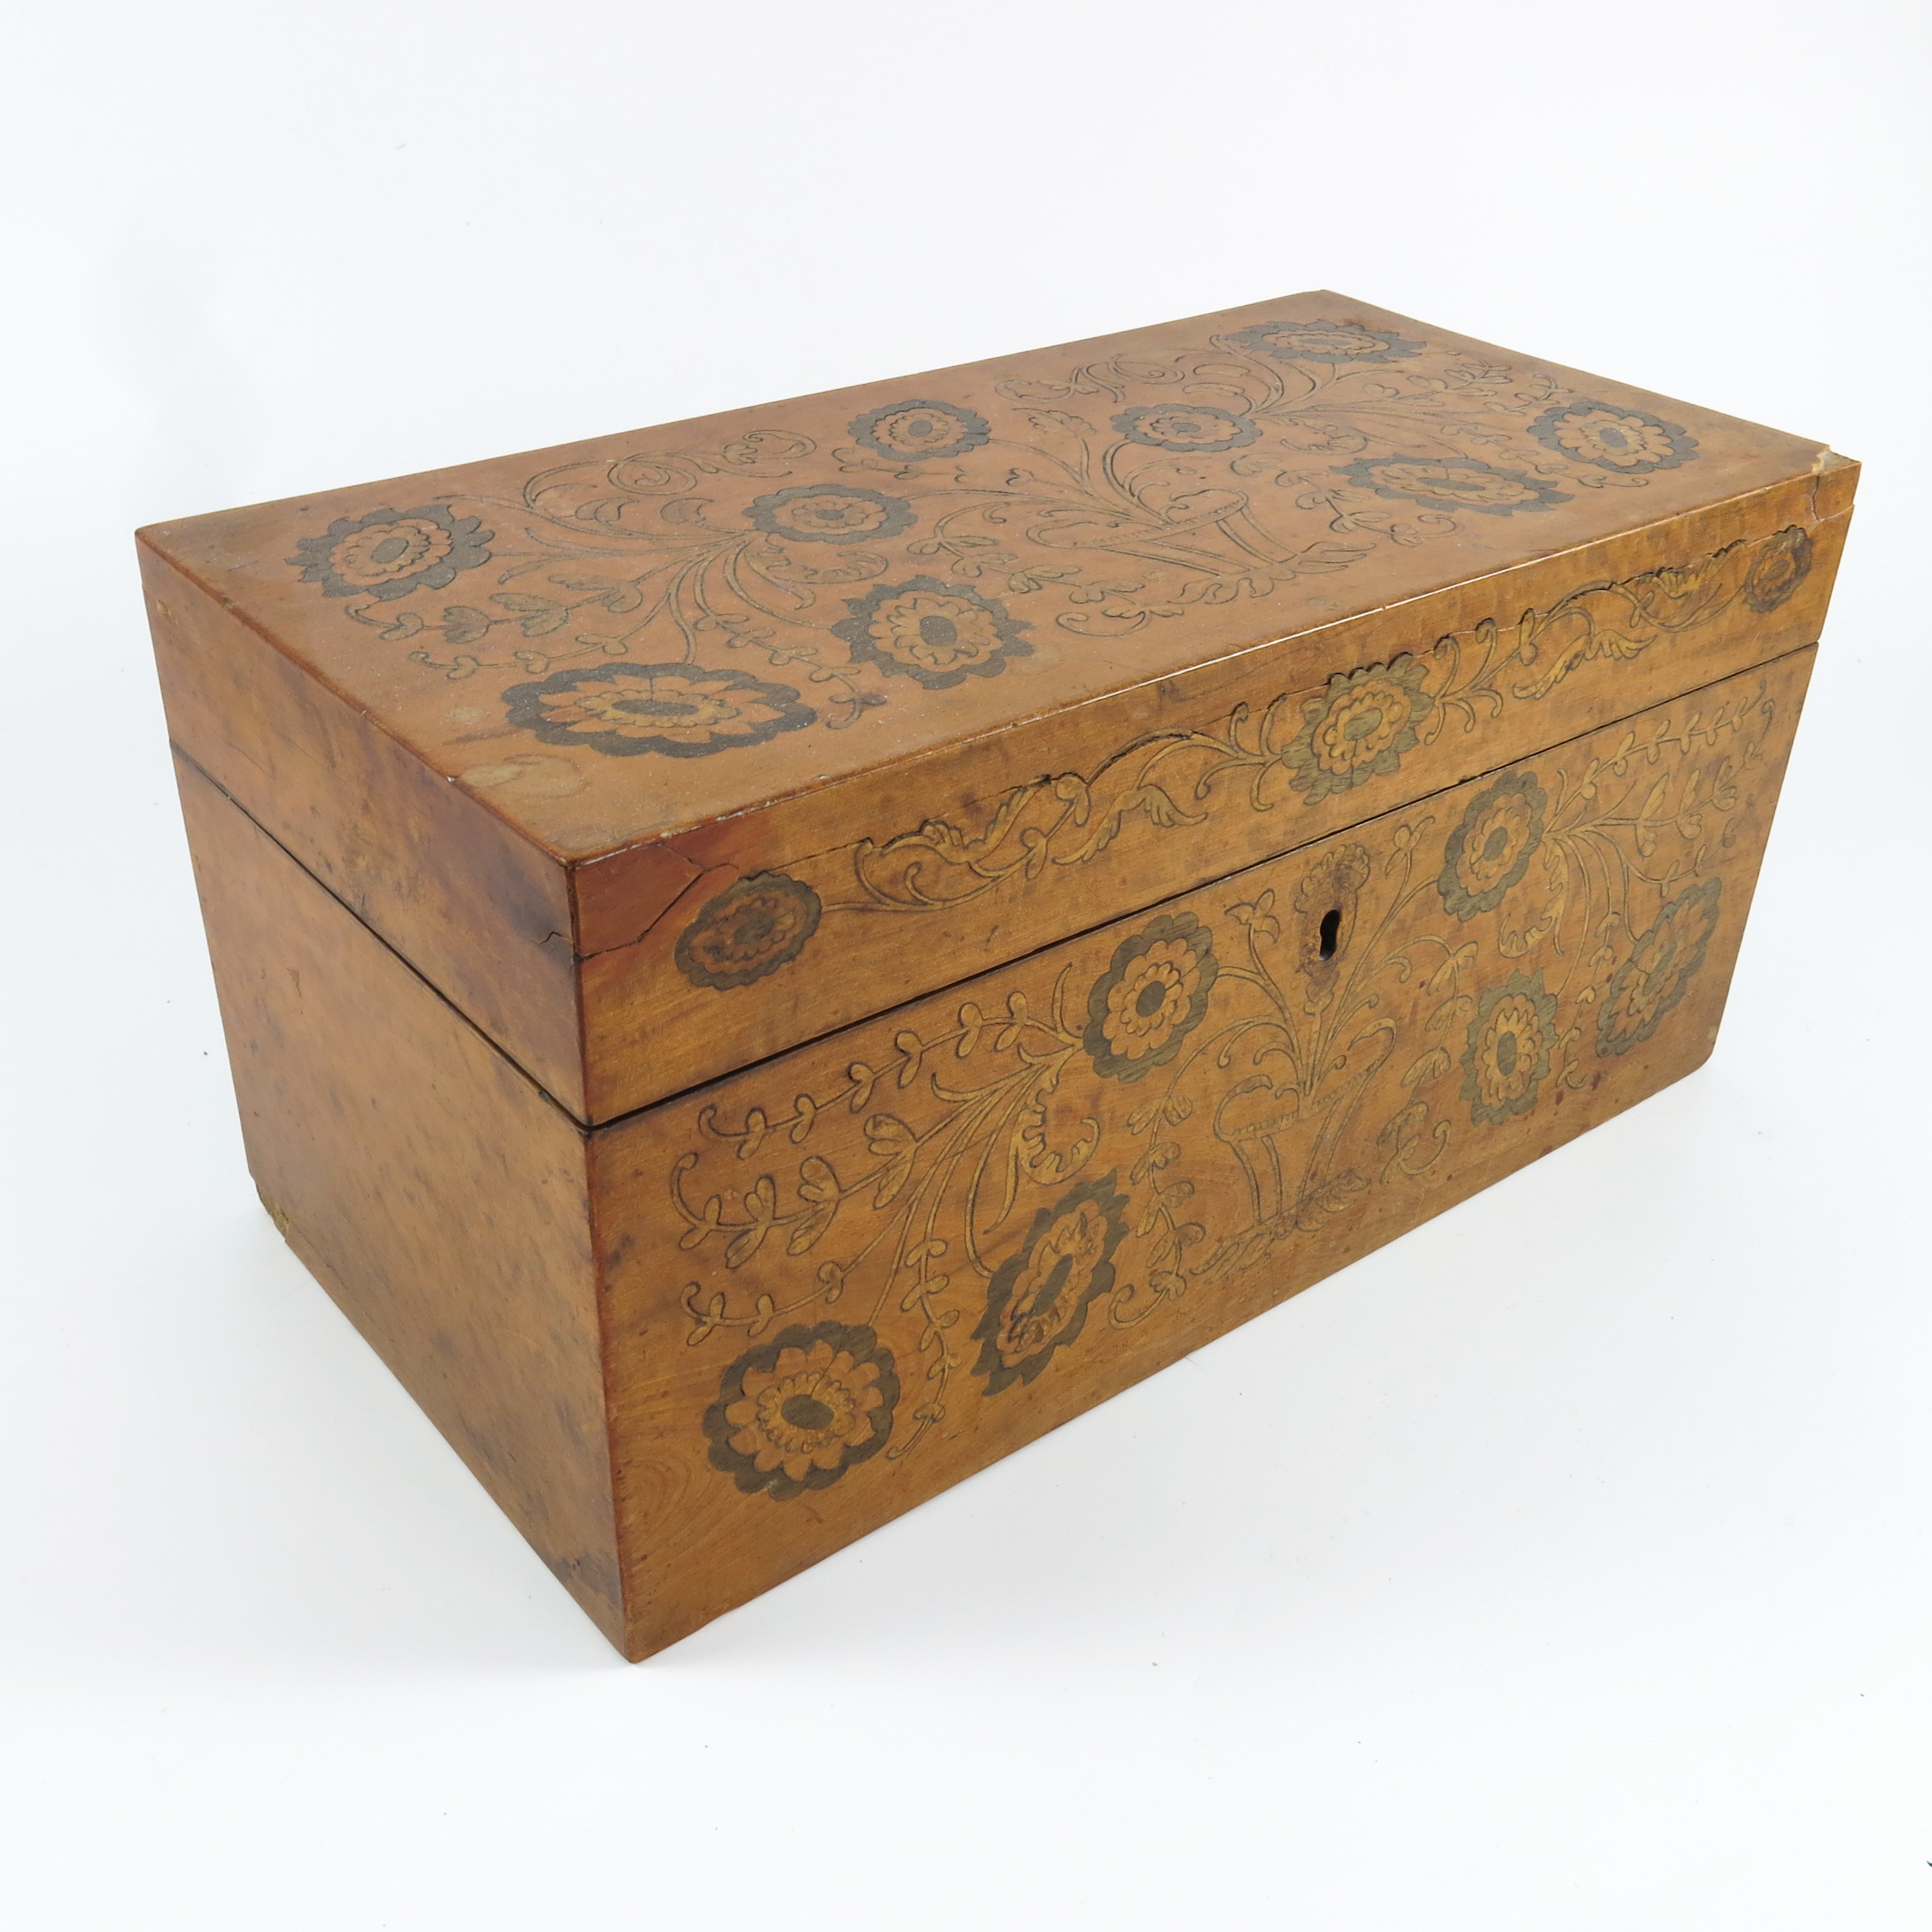 TEA CADDY WITH FLORAL POKER WORK DECORATION AND FITTED INTERIOR